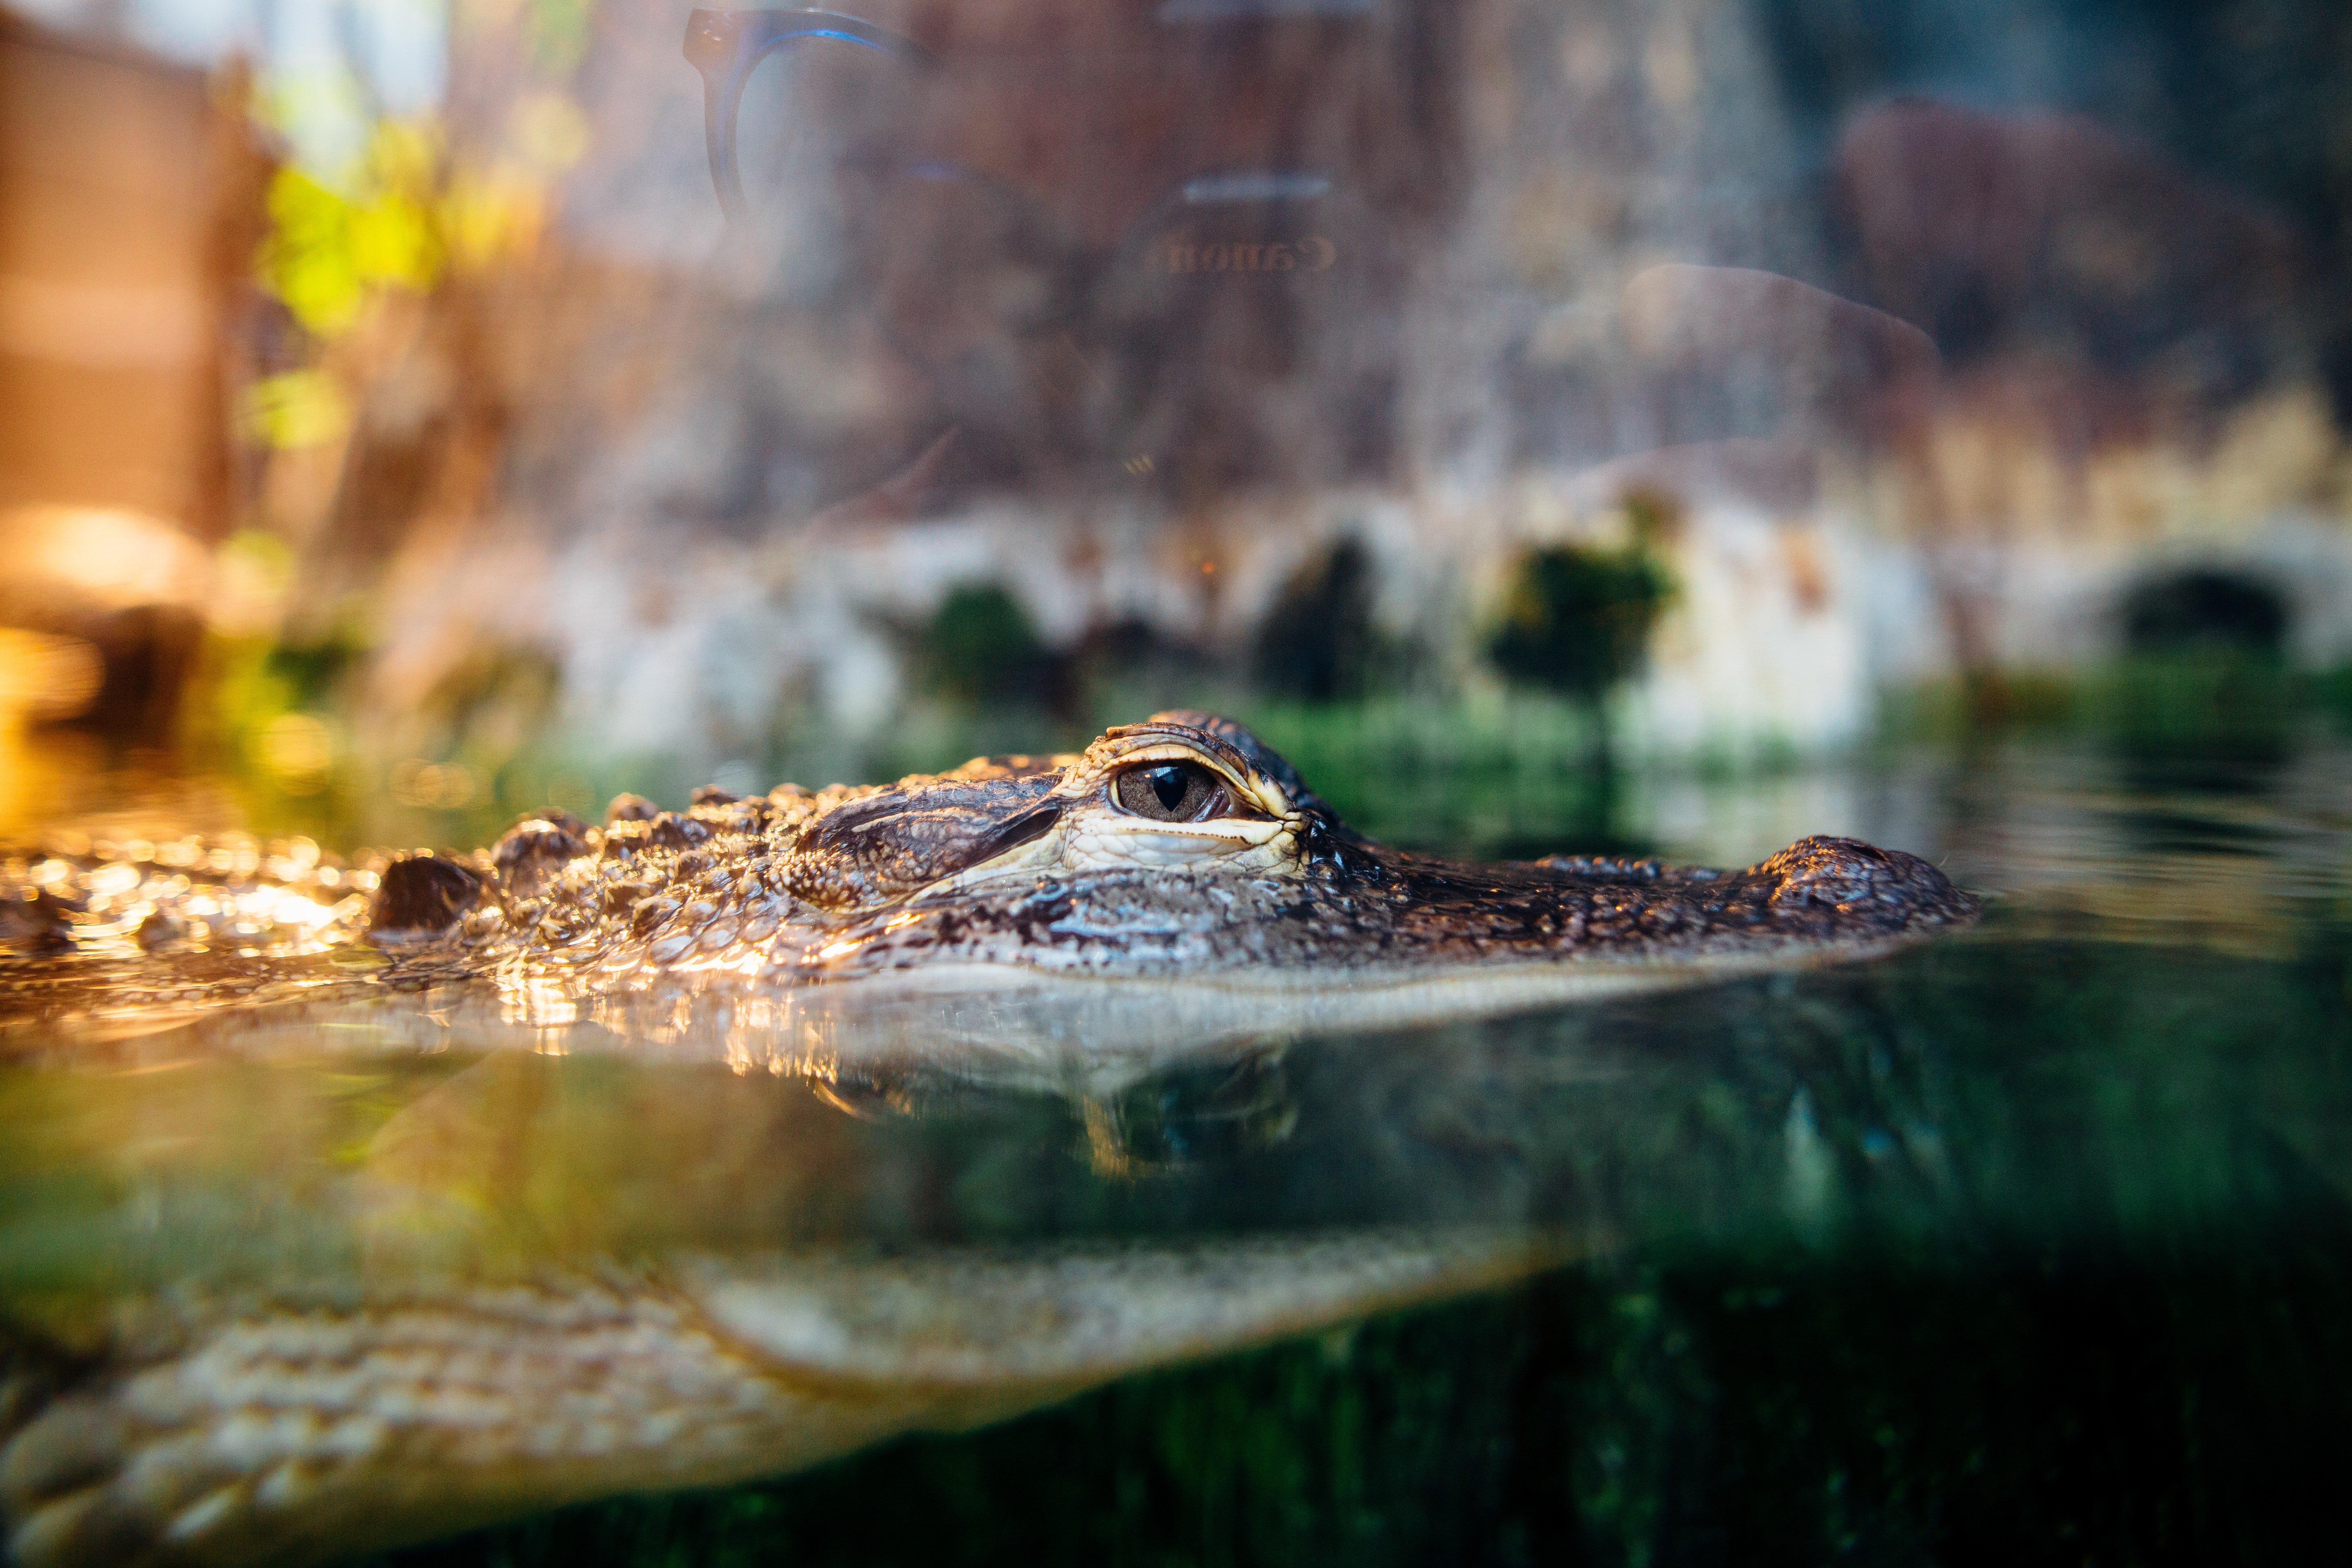 A crocodile hides in water and only lifts its head slightly above the surface | Photo: Pexels/Kelly Lacy